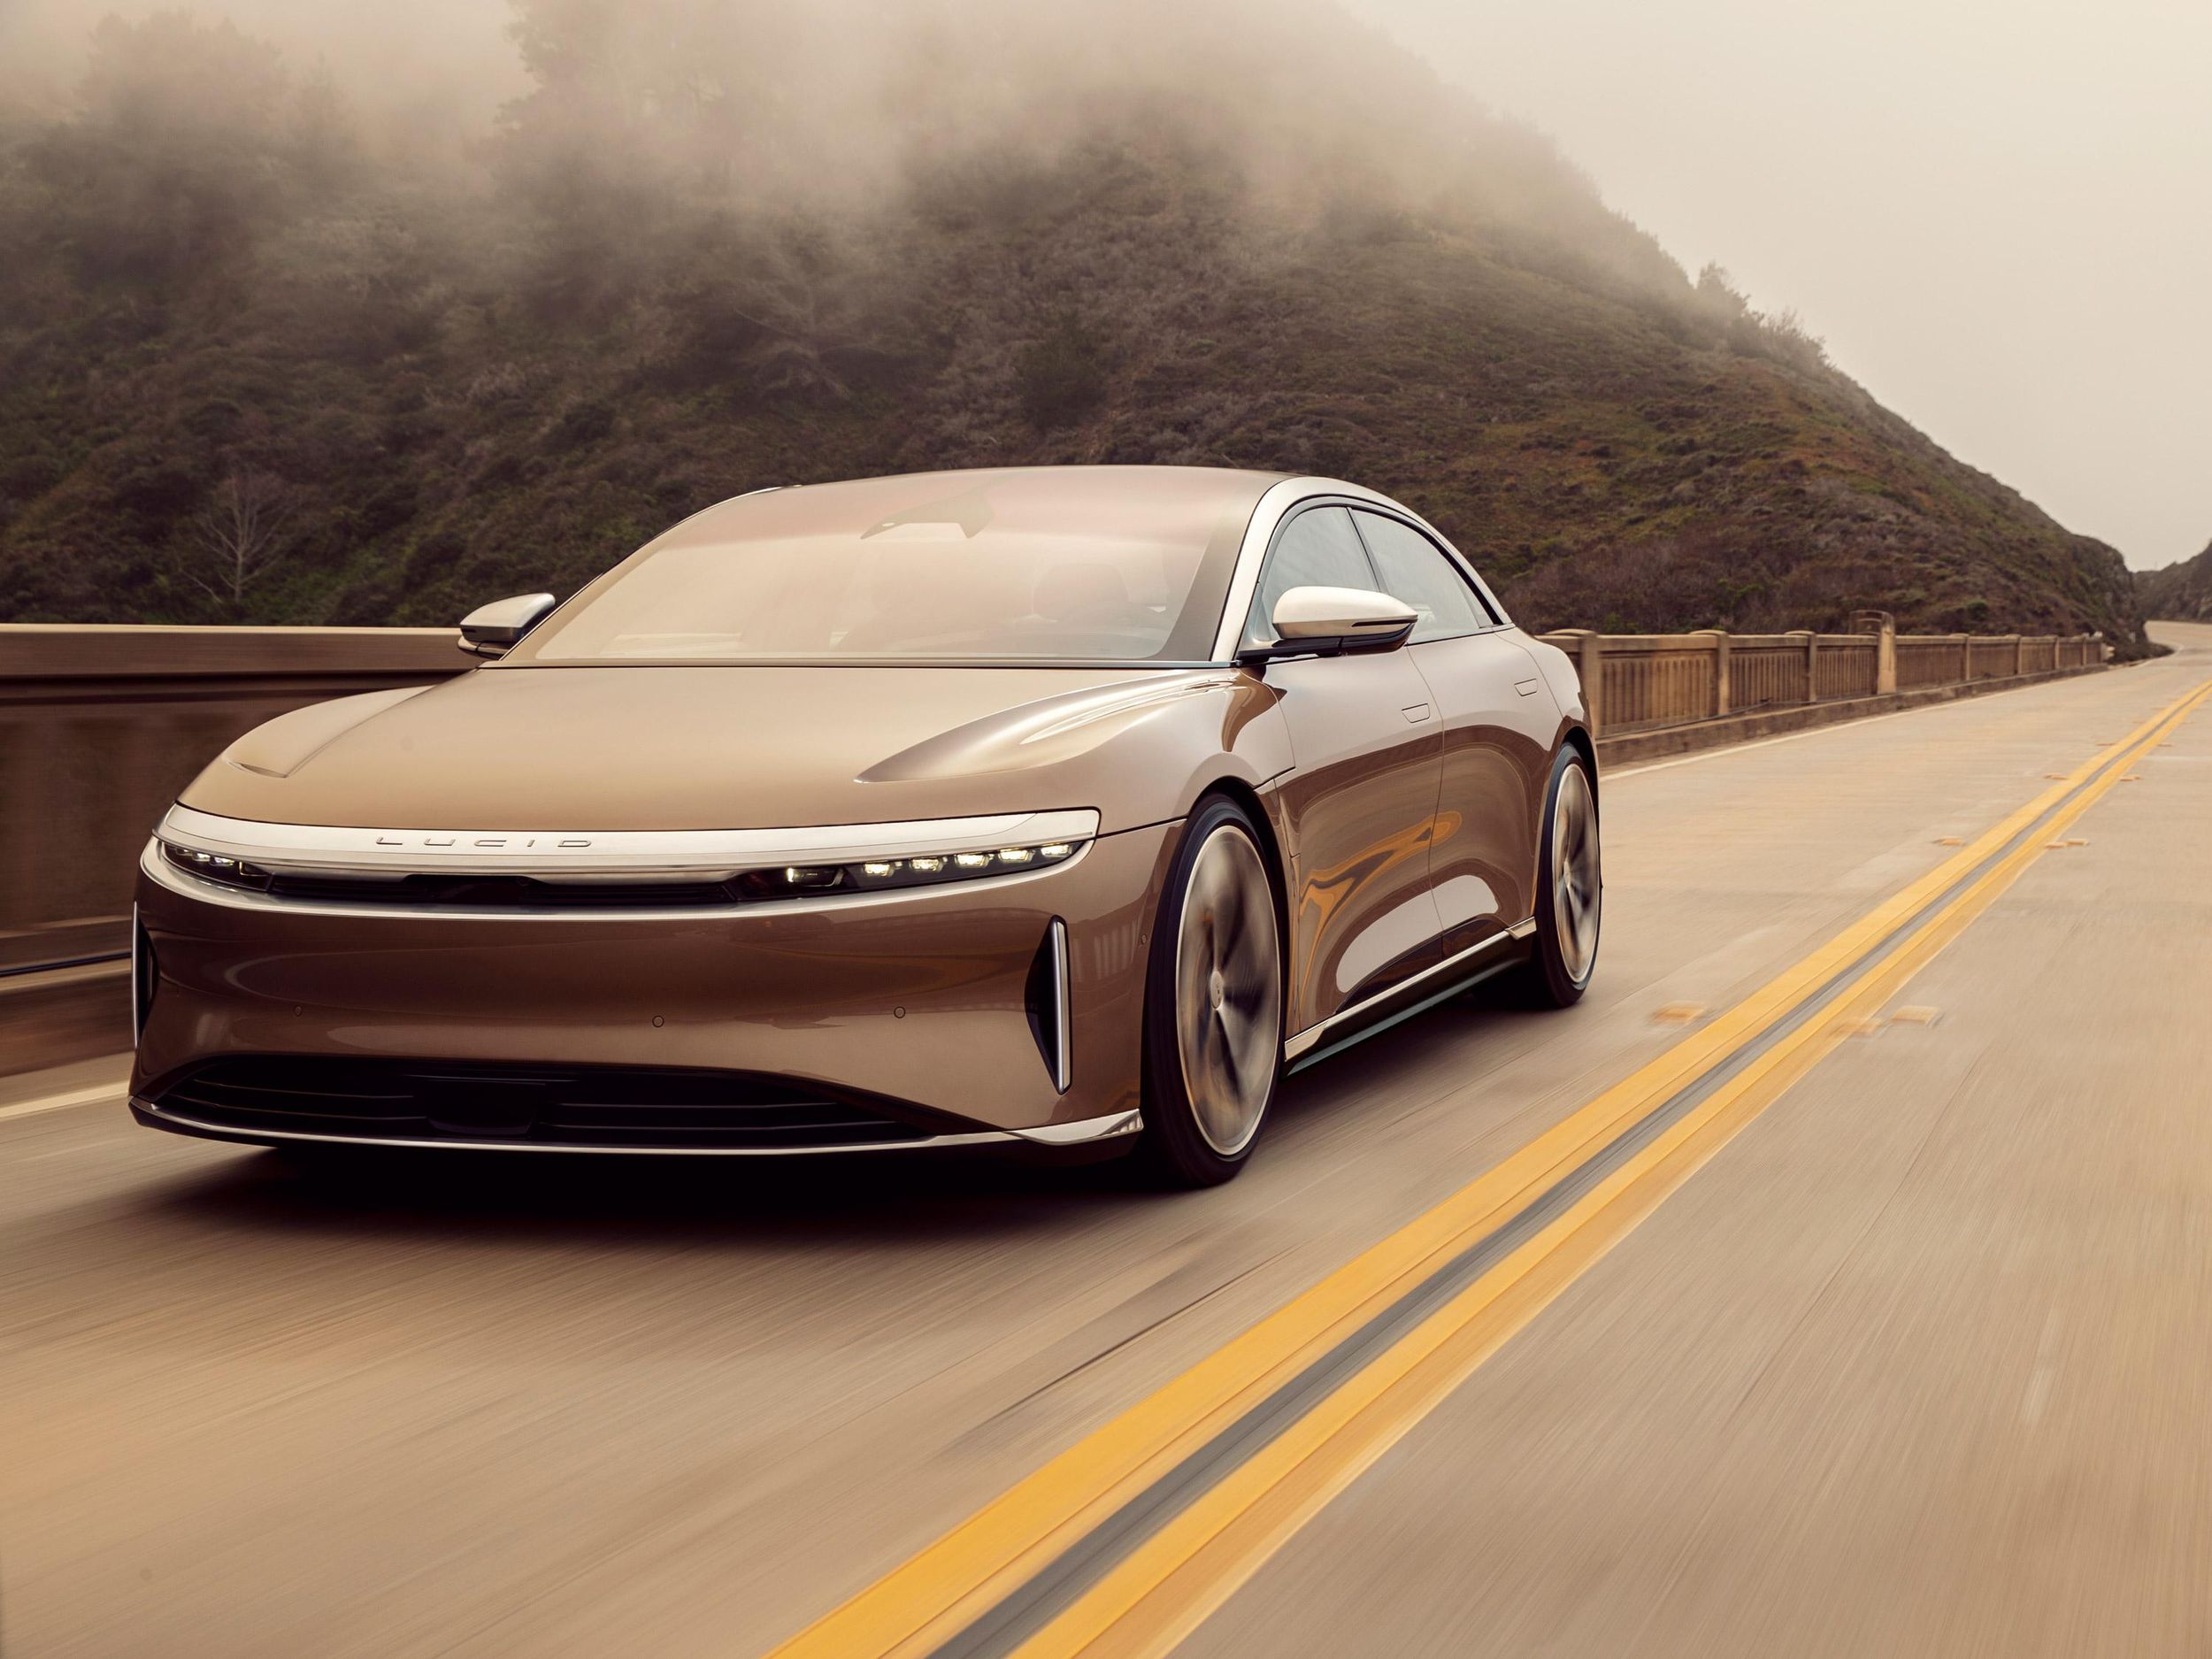 Lucid Air electric vehicle on the road 